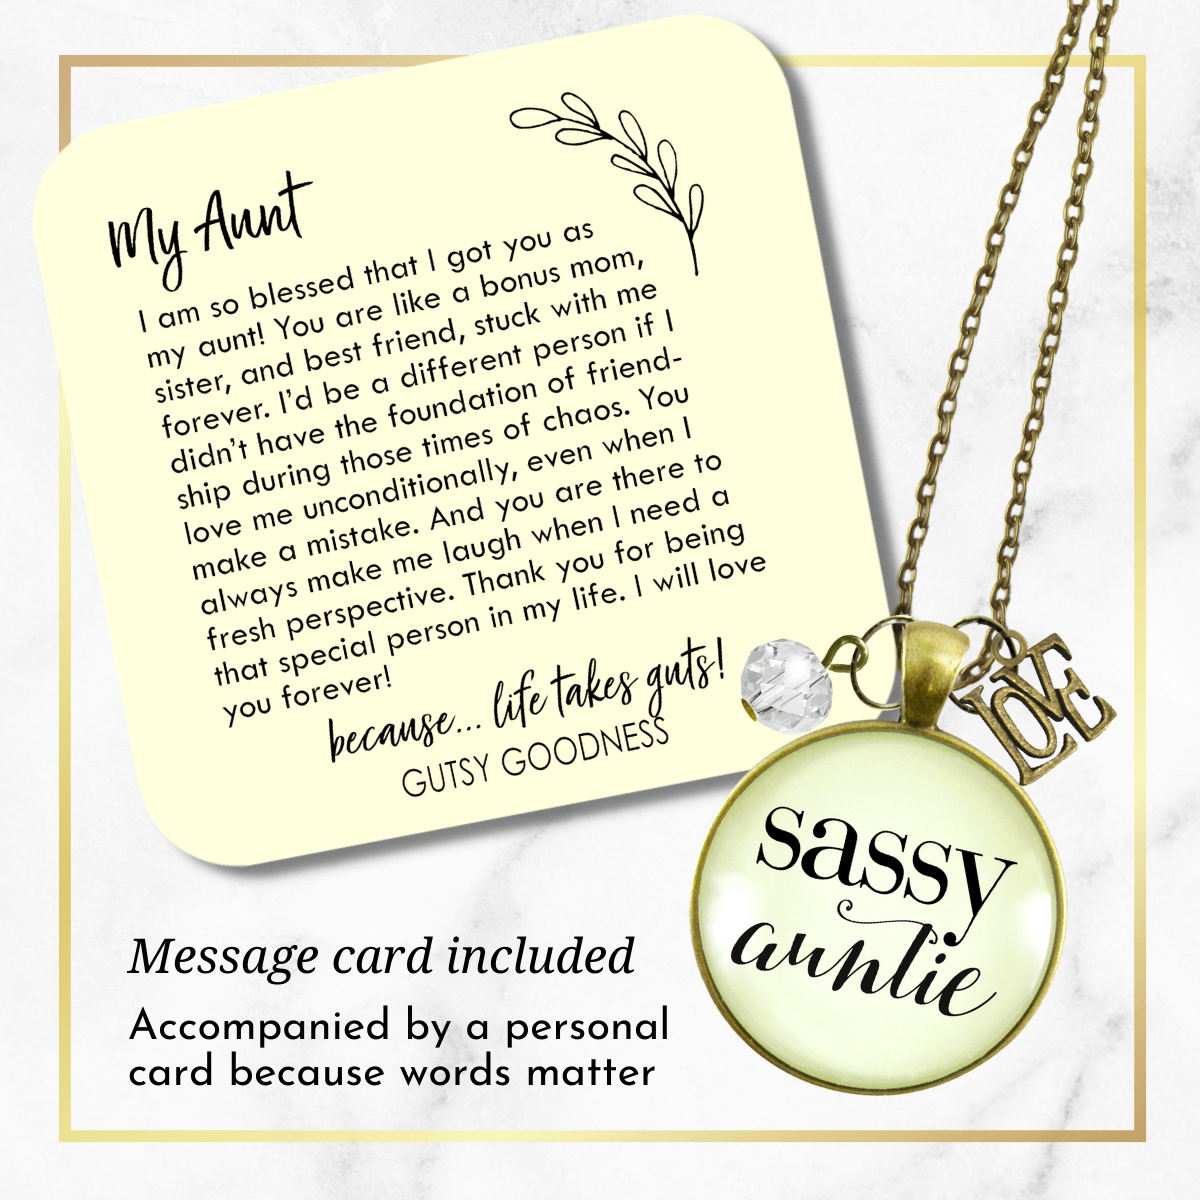 Gutsy Goodness Sassy Auntie Necklace Glam Quote Fun Gift Womens Jewelry Special - Gutsy Goodness Handmade Jewelry;Sassy Auntie Necklace Glam Quote Fun Gift Womens Jewelry Special - Gutsy Goodness Handmade Jewelry Gifts